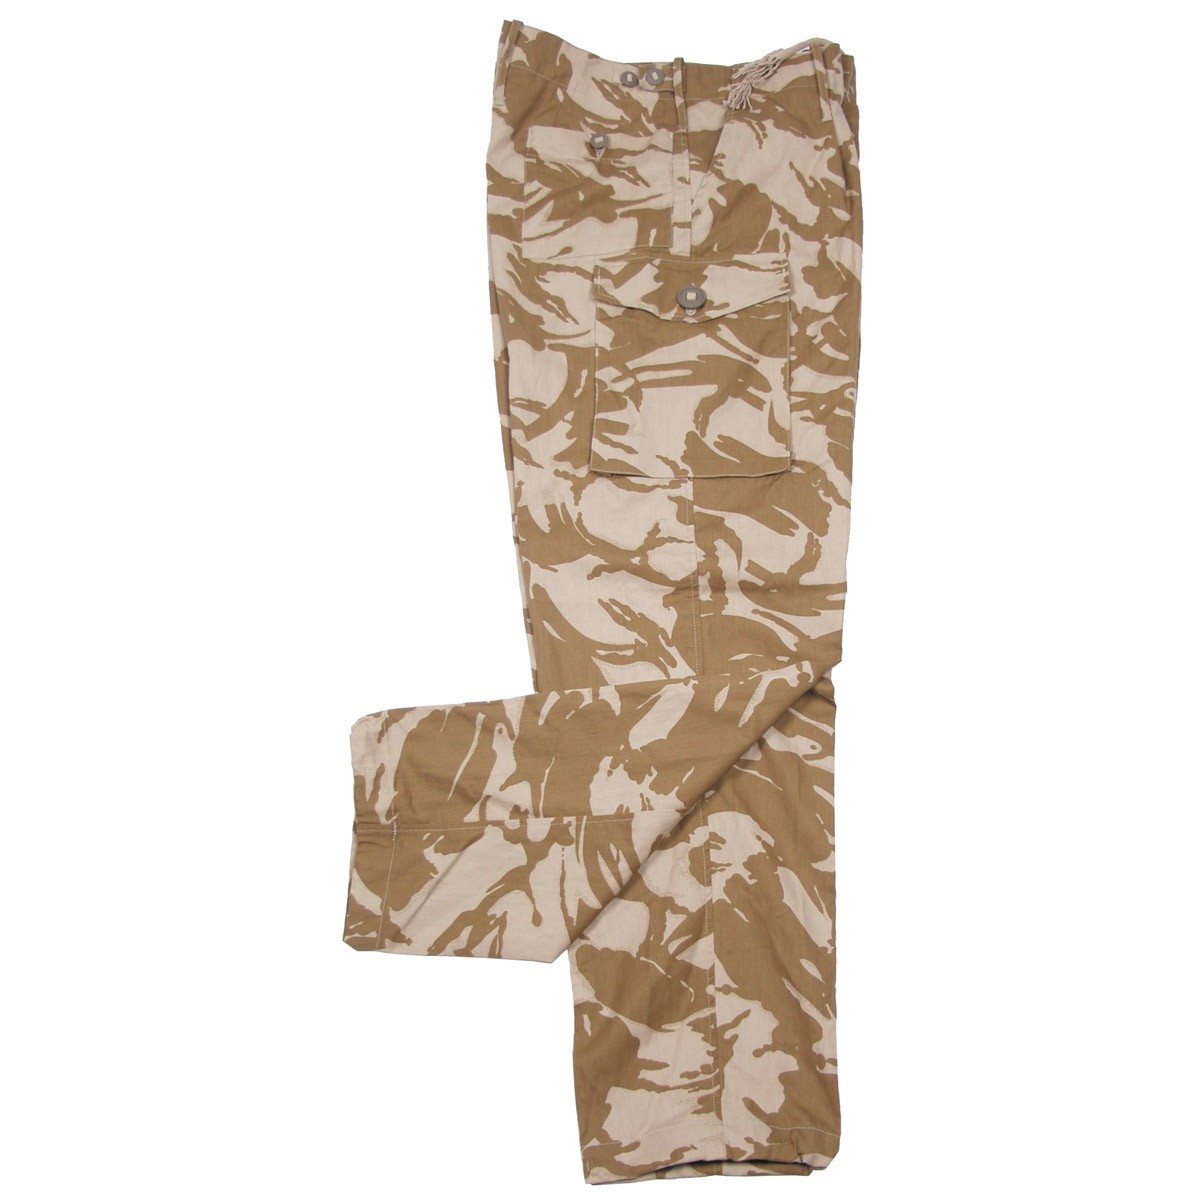 Original Hungarian Army Camo Pants Issue Desert Combat Field Troops Trousers